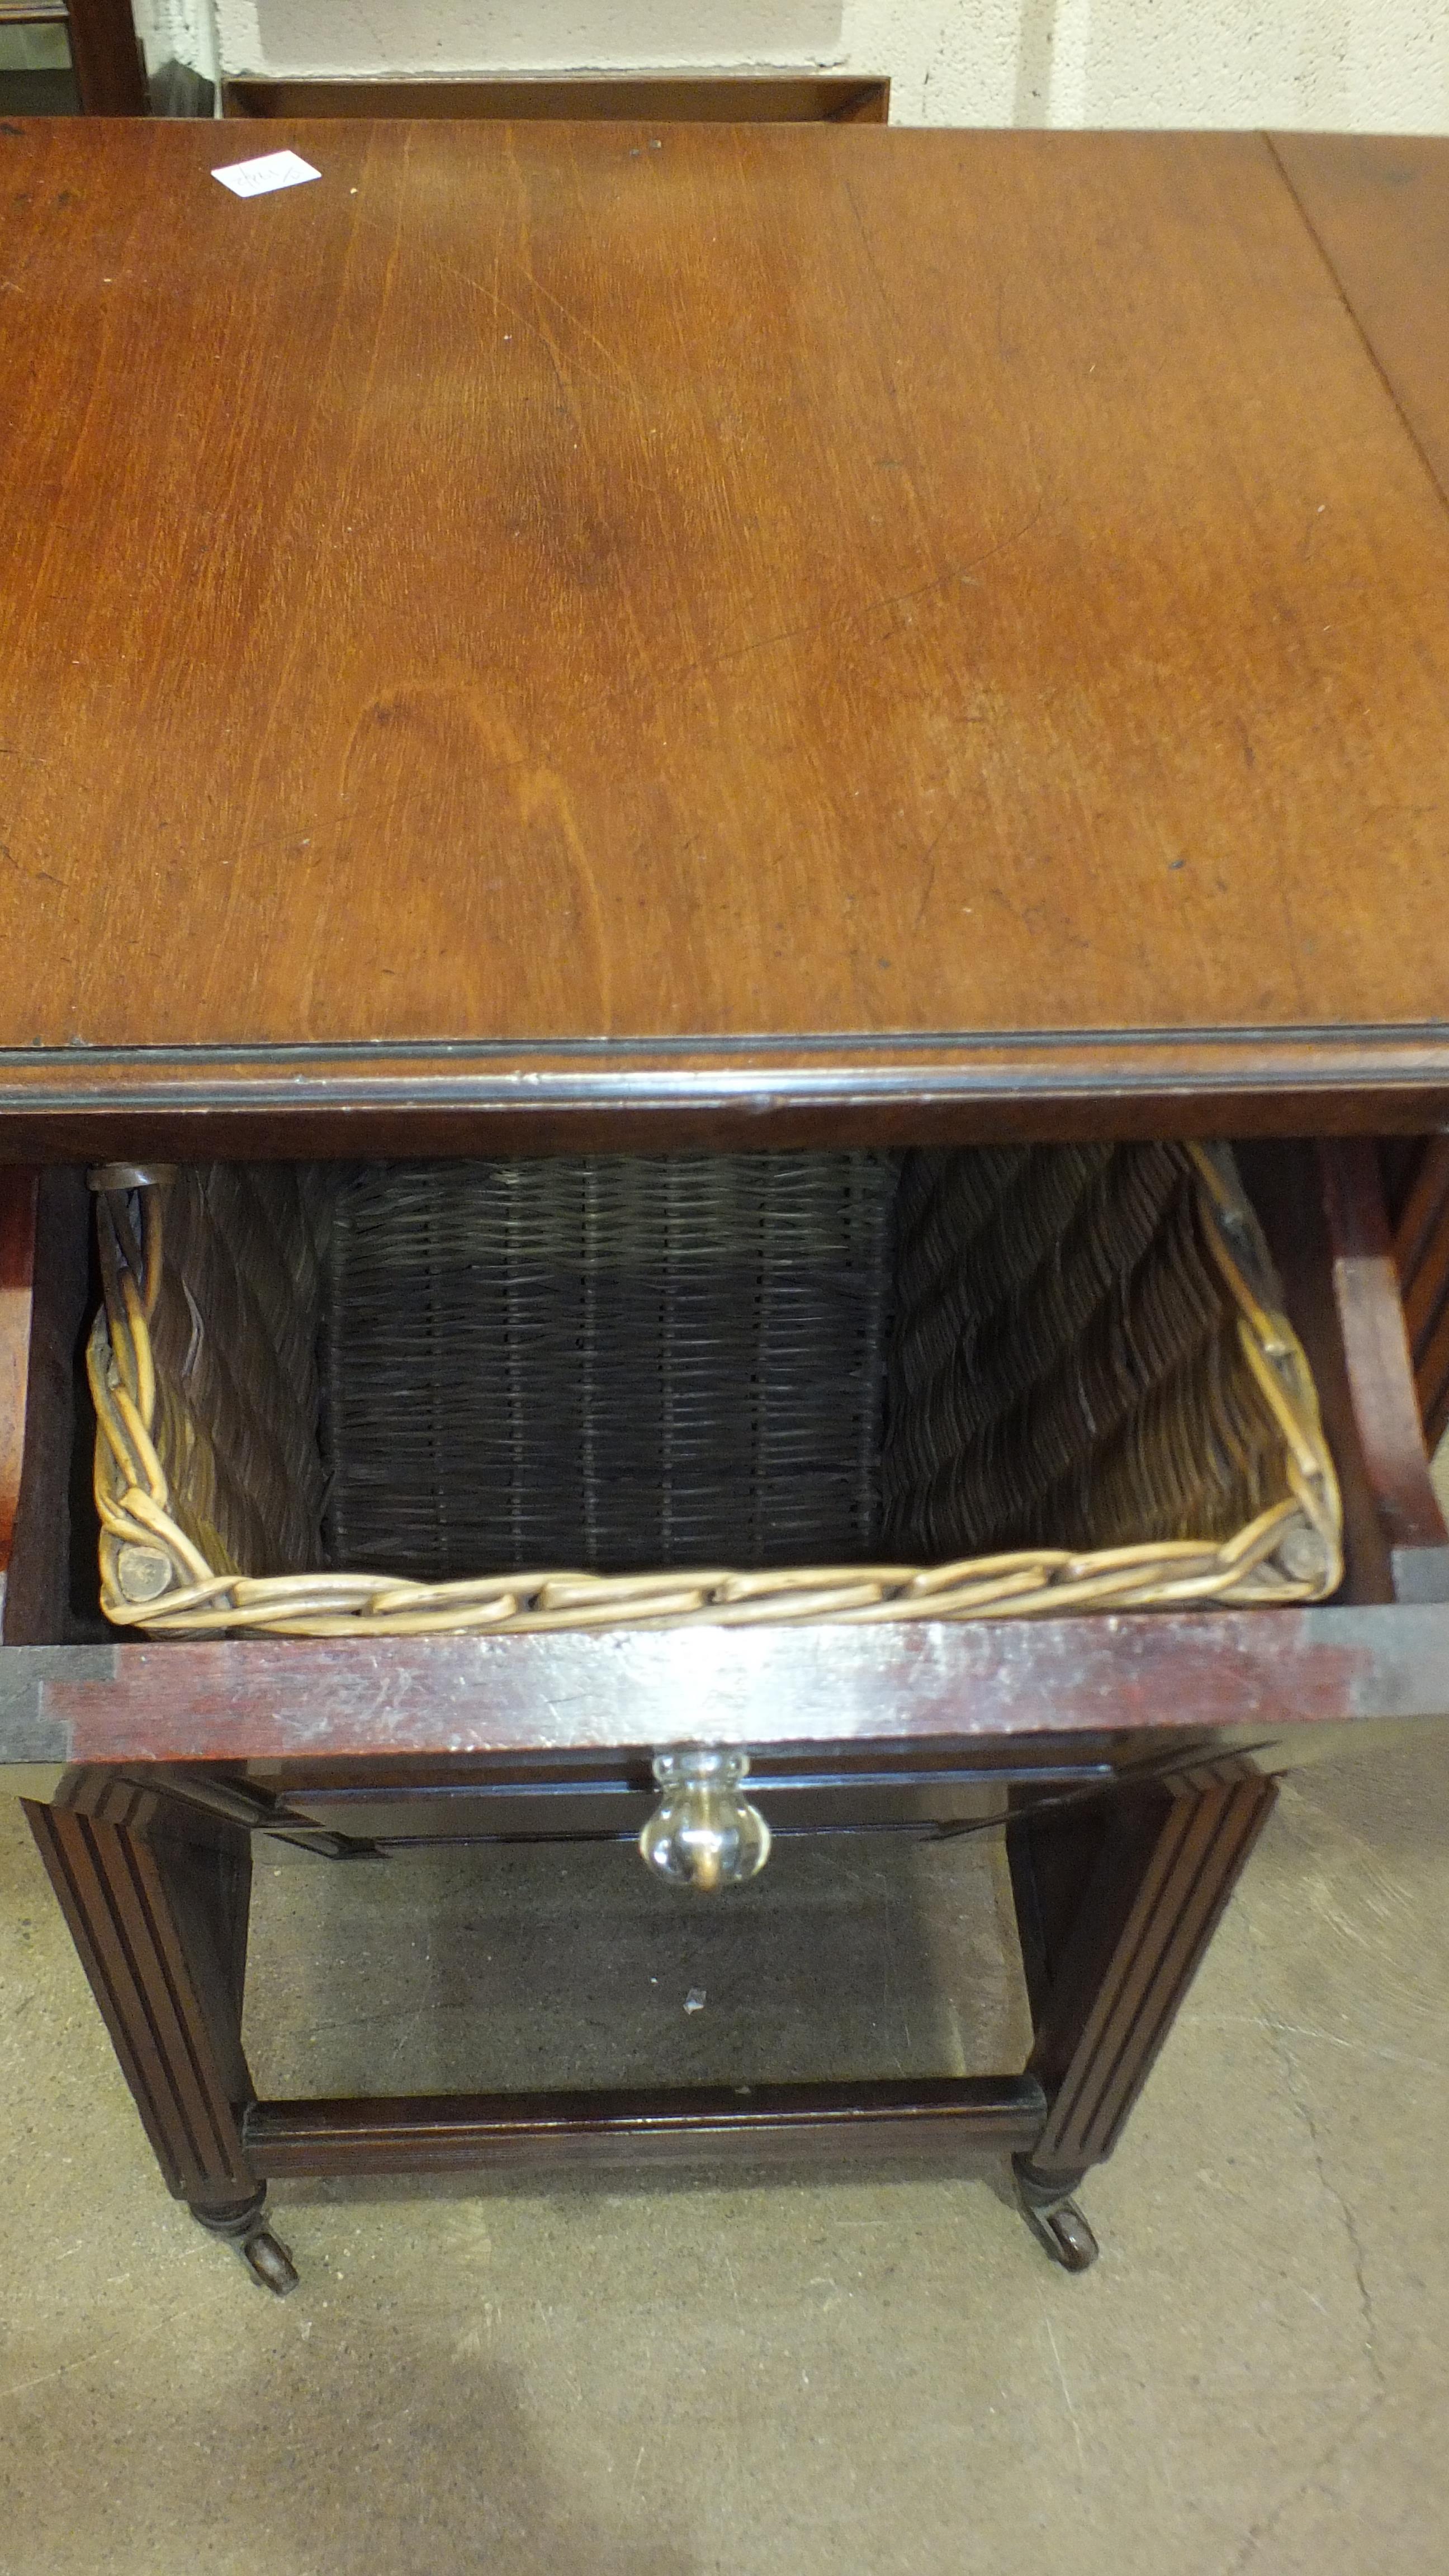 A mahogany coal purdonium with panelled door, wicker lining basket and the top with folding - Image 3 of 3